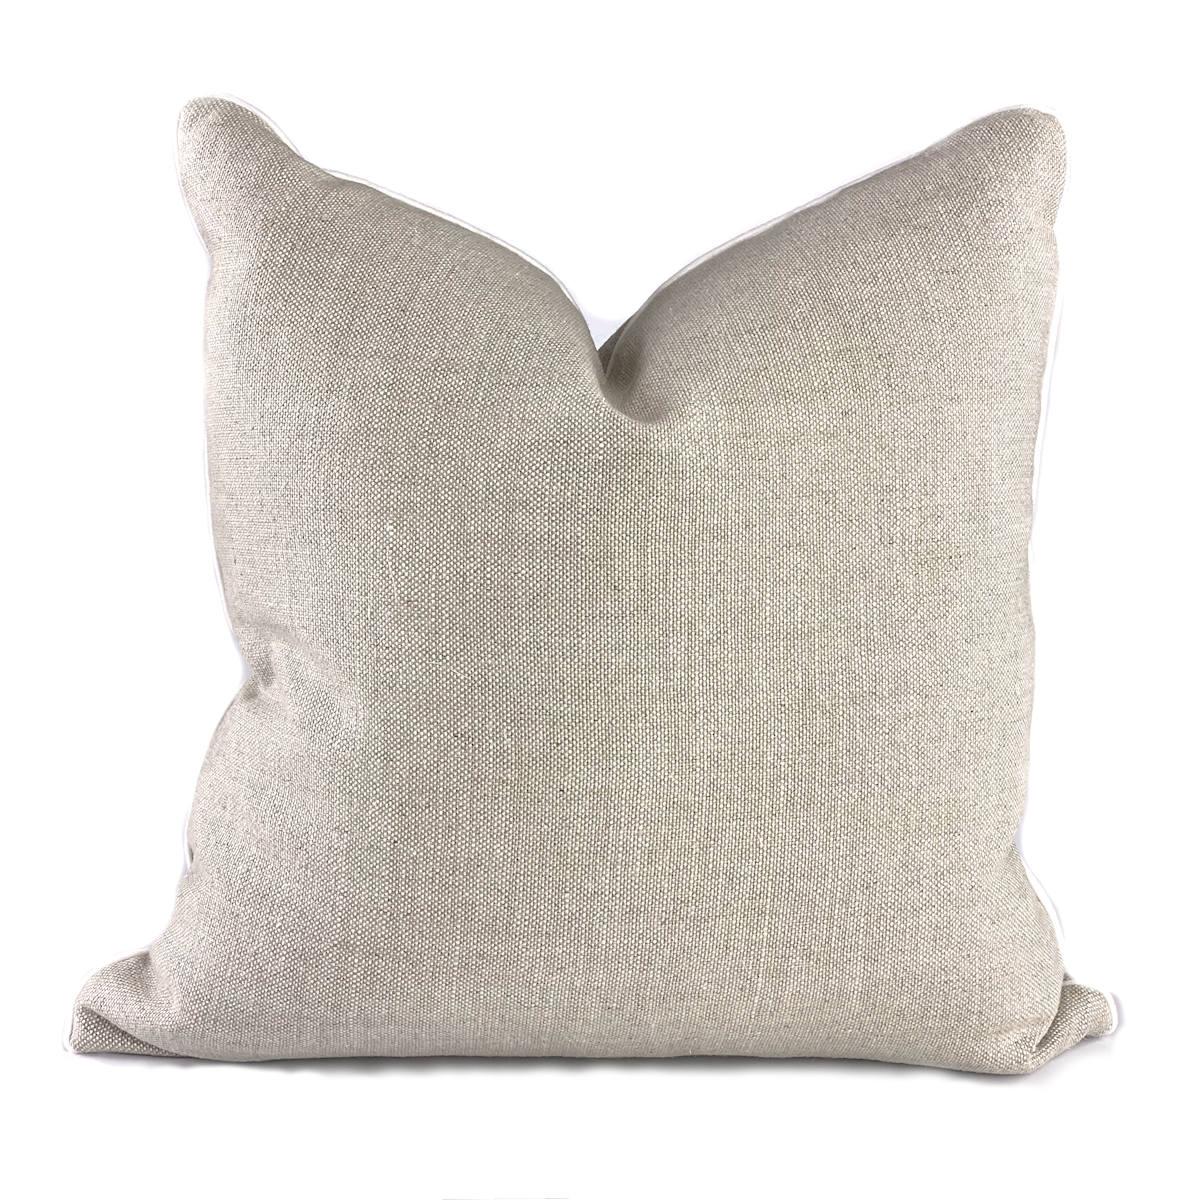 Australian artisan design and craftsmanship, this high-end, vintage linen pillow provides casual luxury fused with contemporary elegance. 

Showcasing the natural beauty of European linen bringing inviting soft textures to both classic and formal